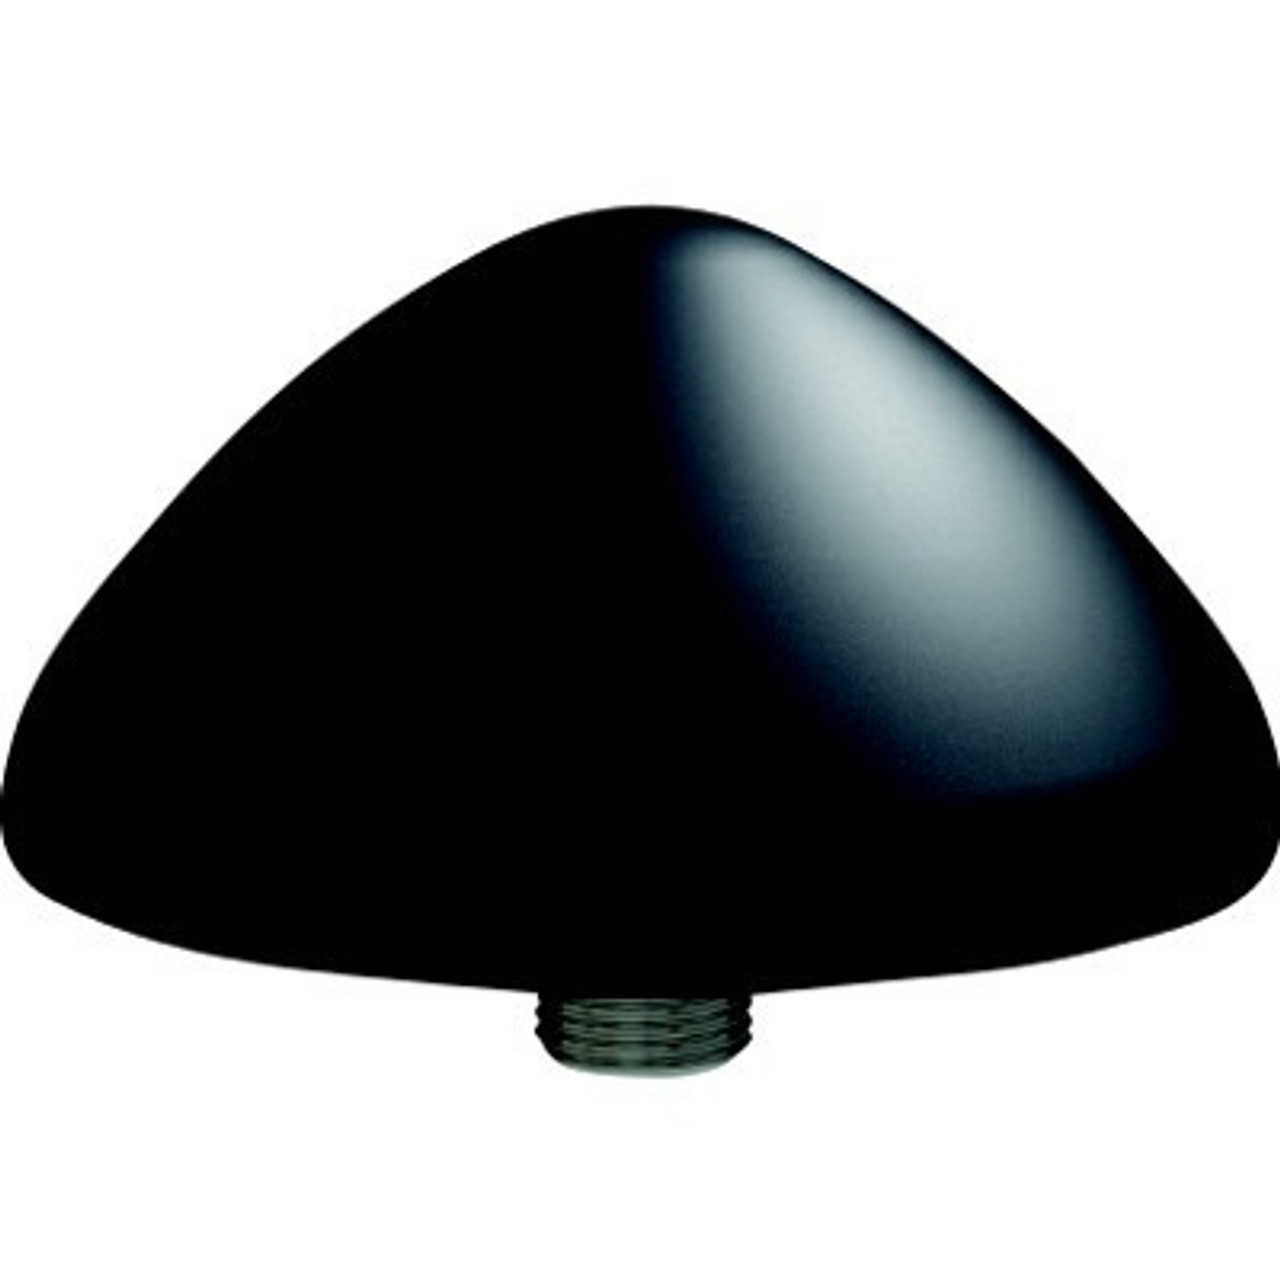 CP-1013-1-PAN CradlePoint Low Profile Panel Mount Antenna 4.90 GHz to 6 GHz 2 dBi Wireless Data Network Black Screw/Panel Omni-directional SMA Connector